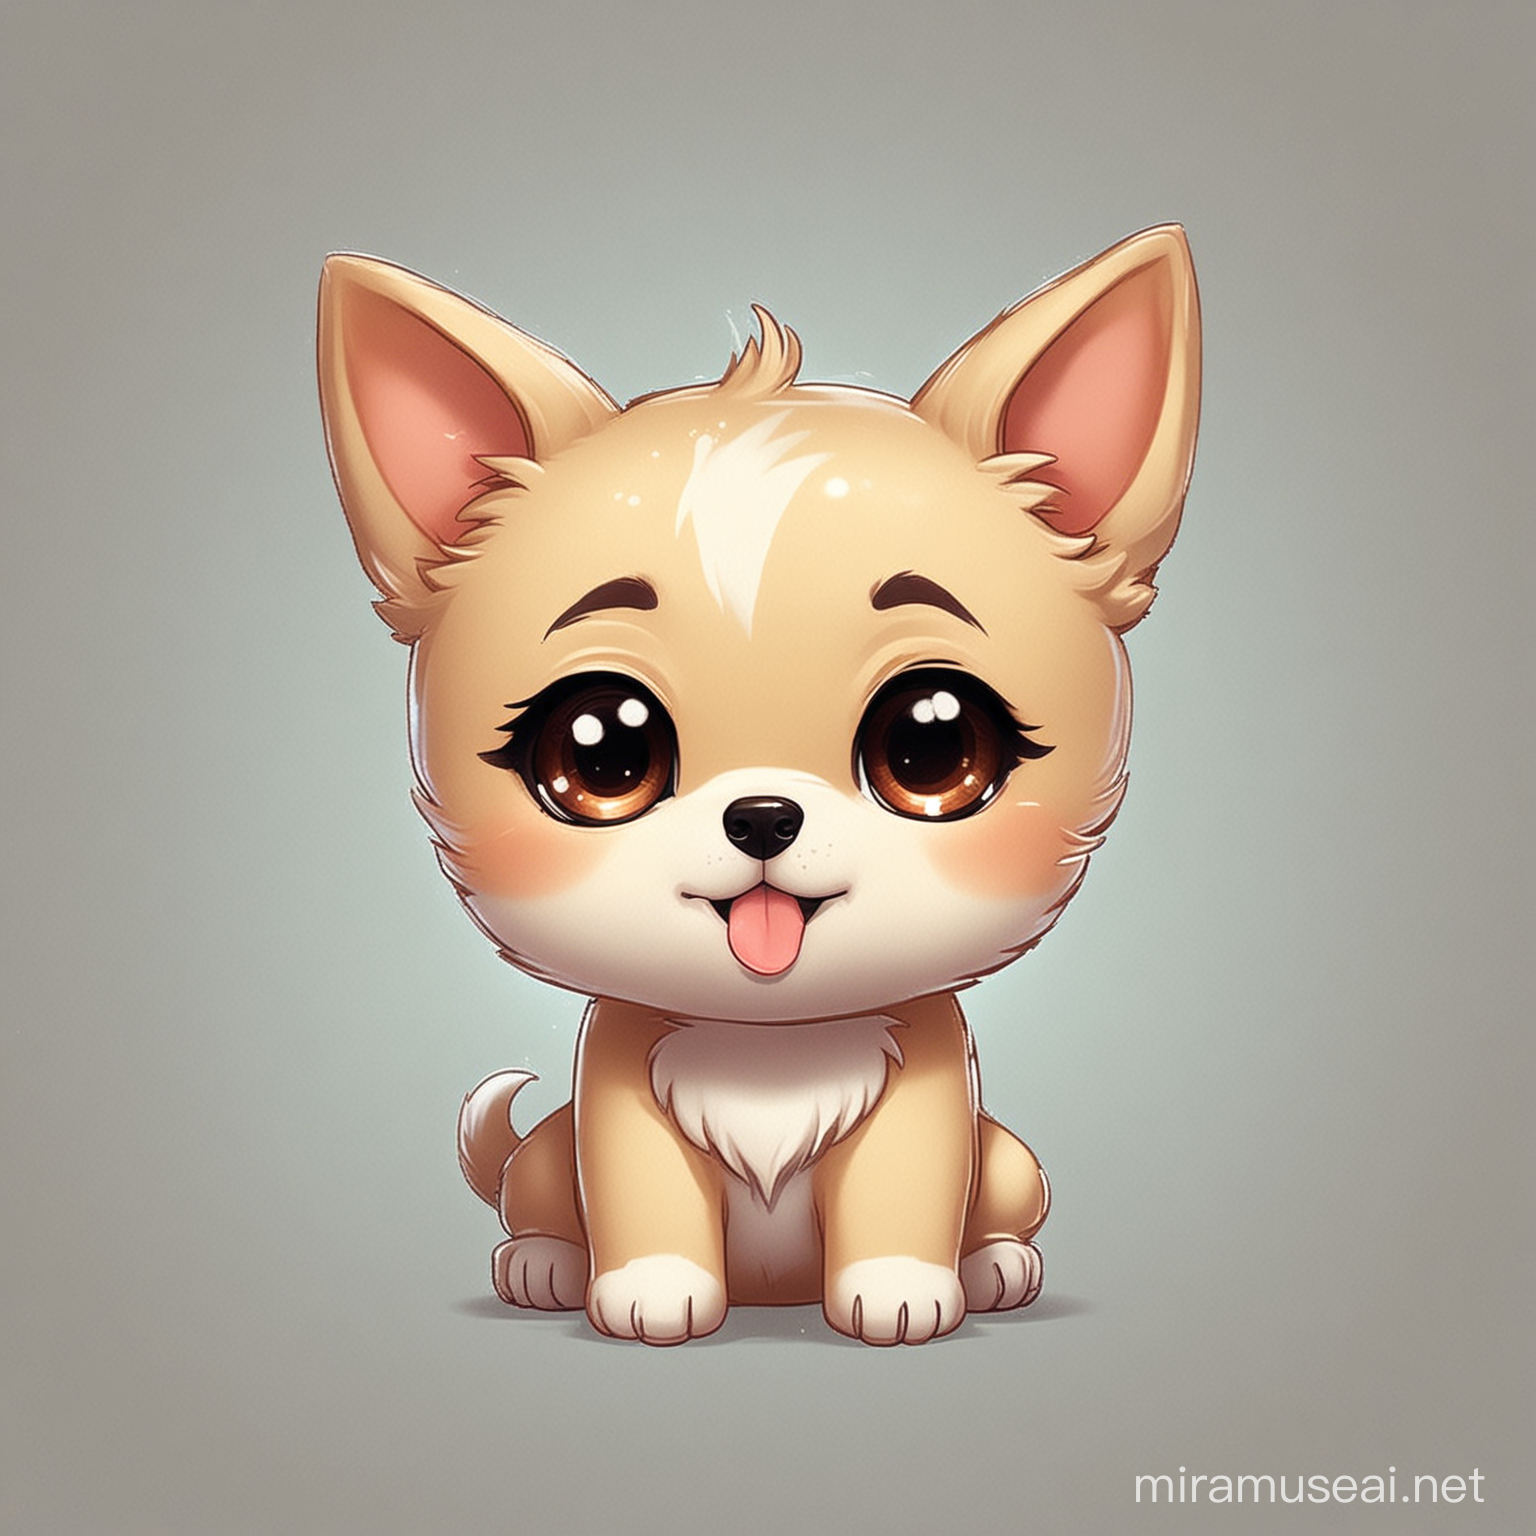 Adorable Chibi Dog with Playful Expression